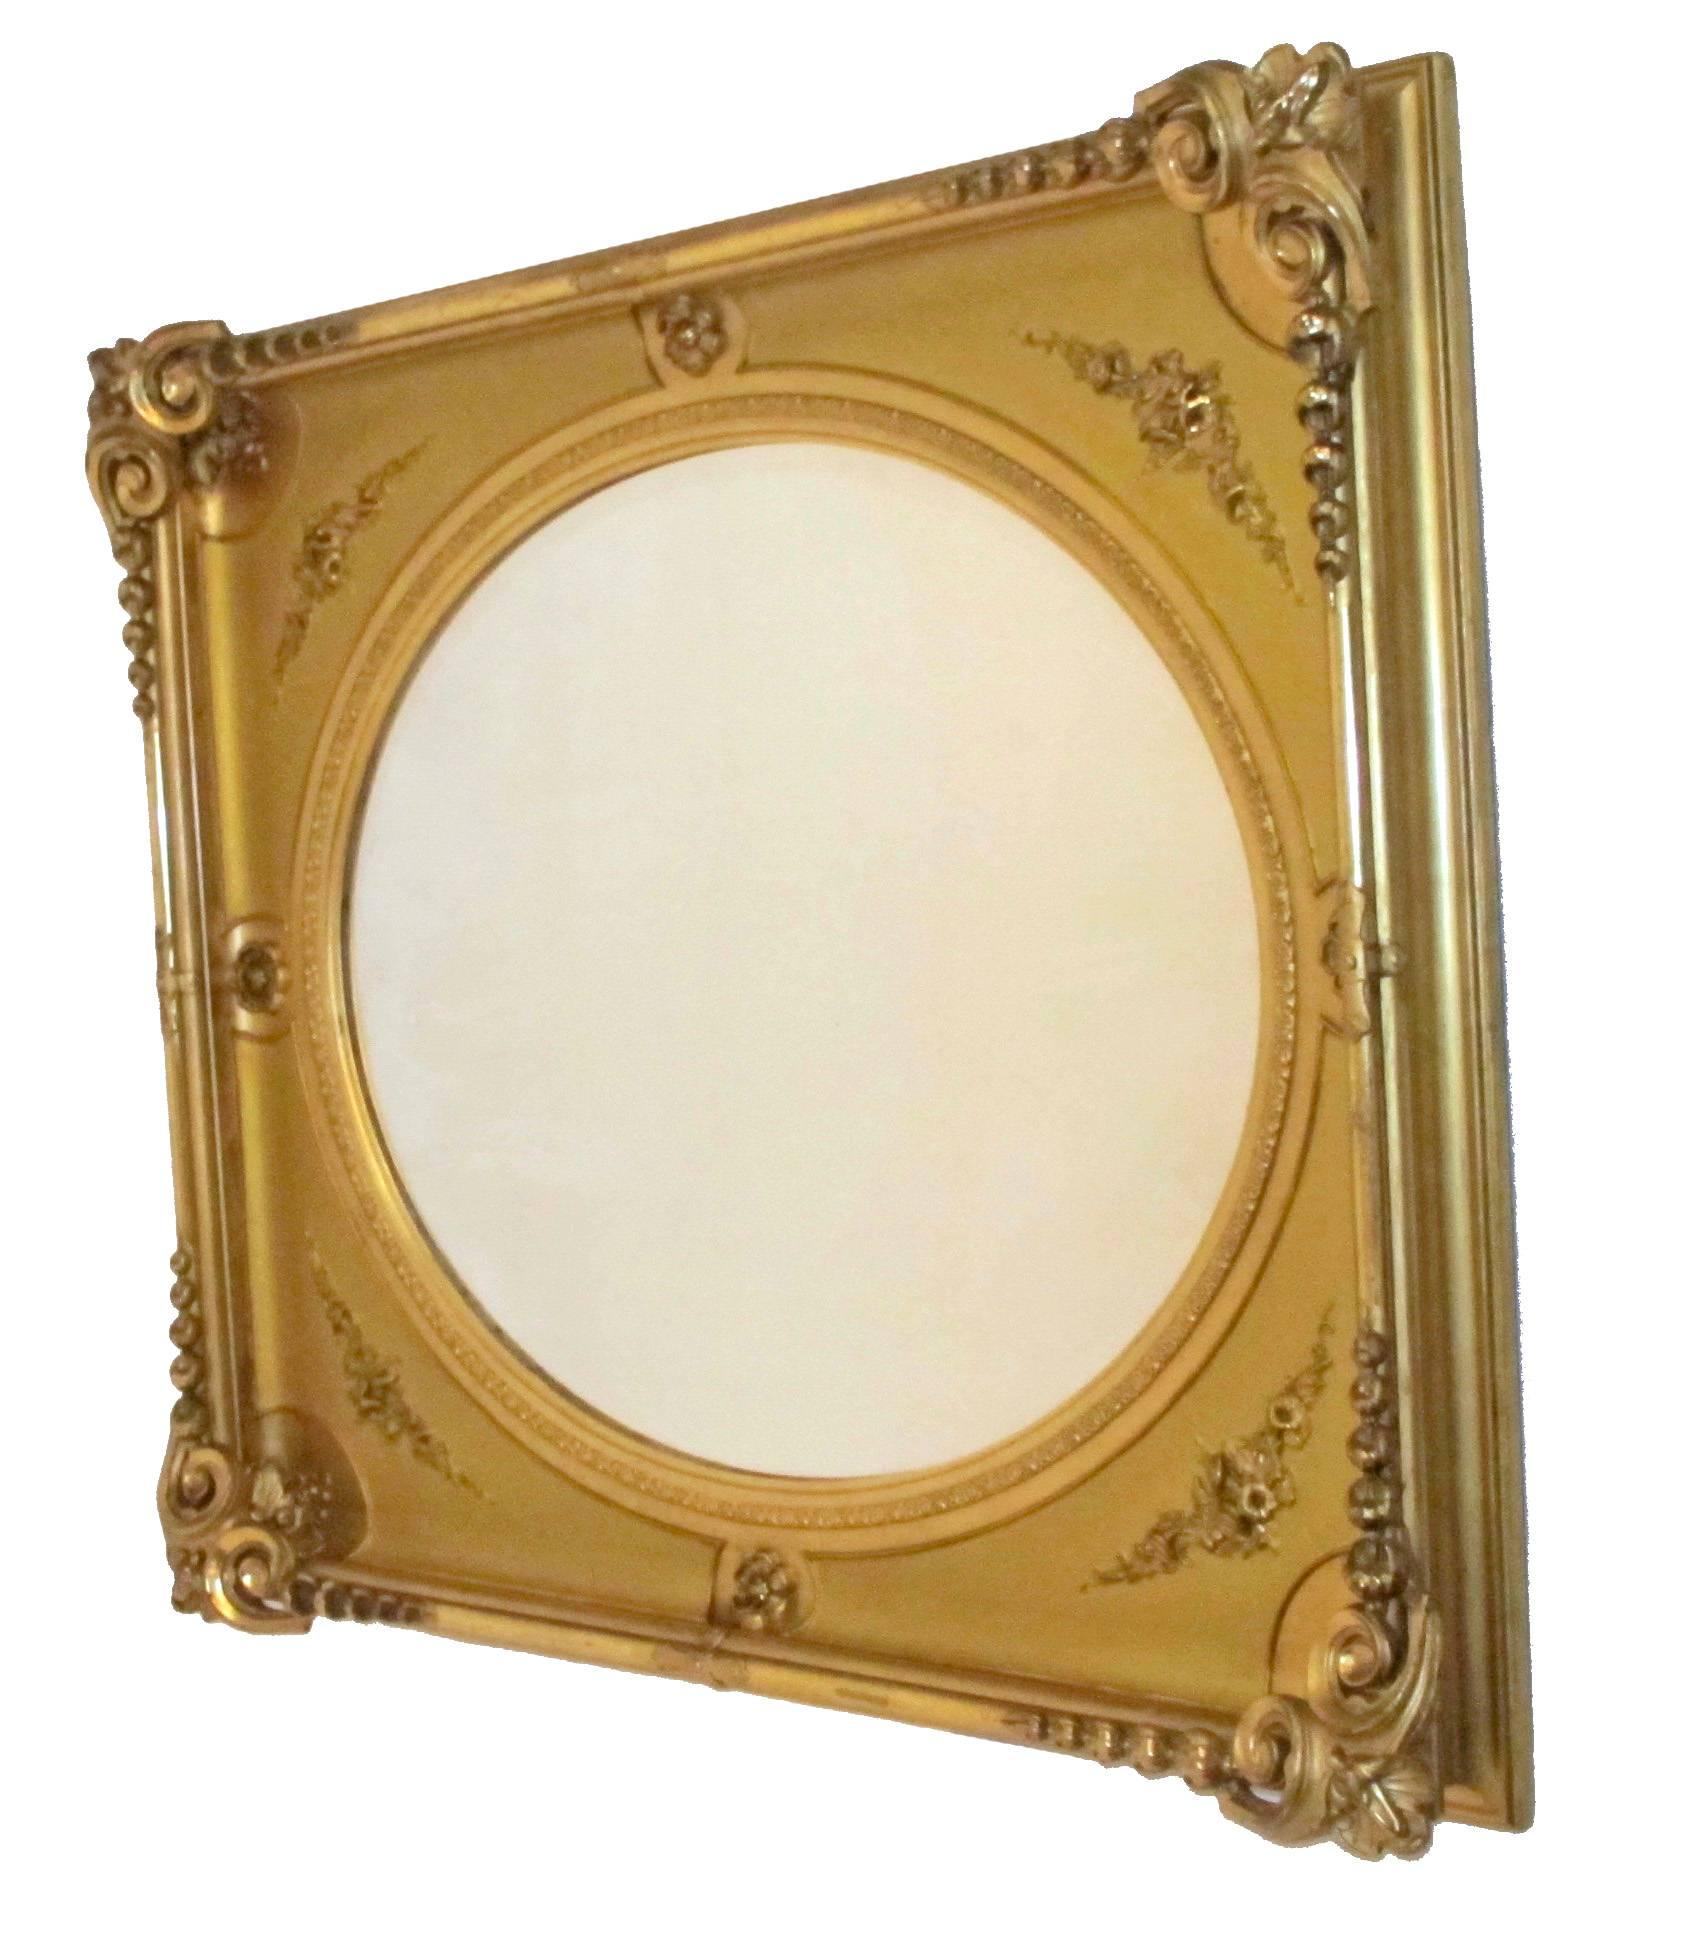 A beautiful quality water gilded portrait frame converted to a mirror, France, late 19th century.